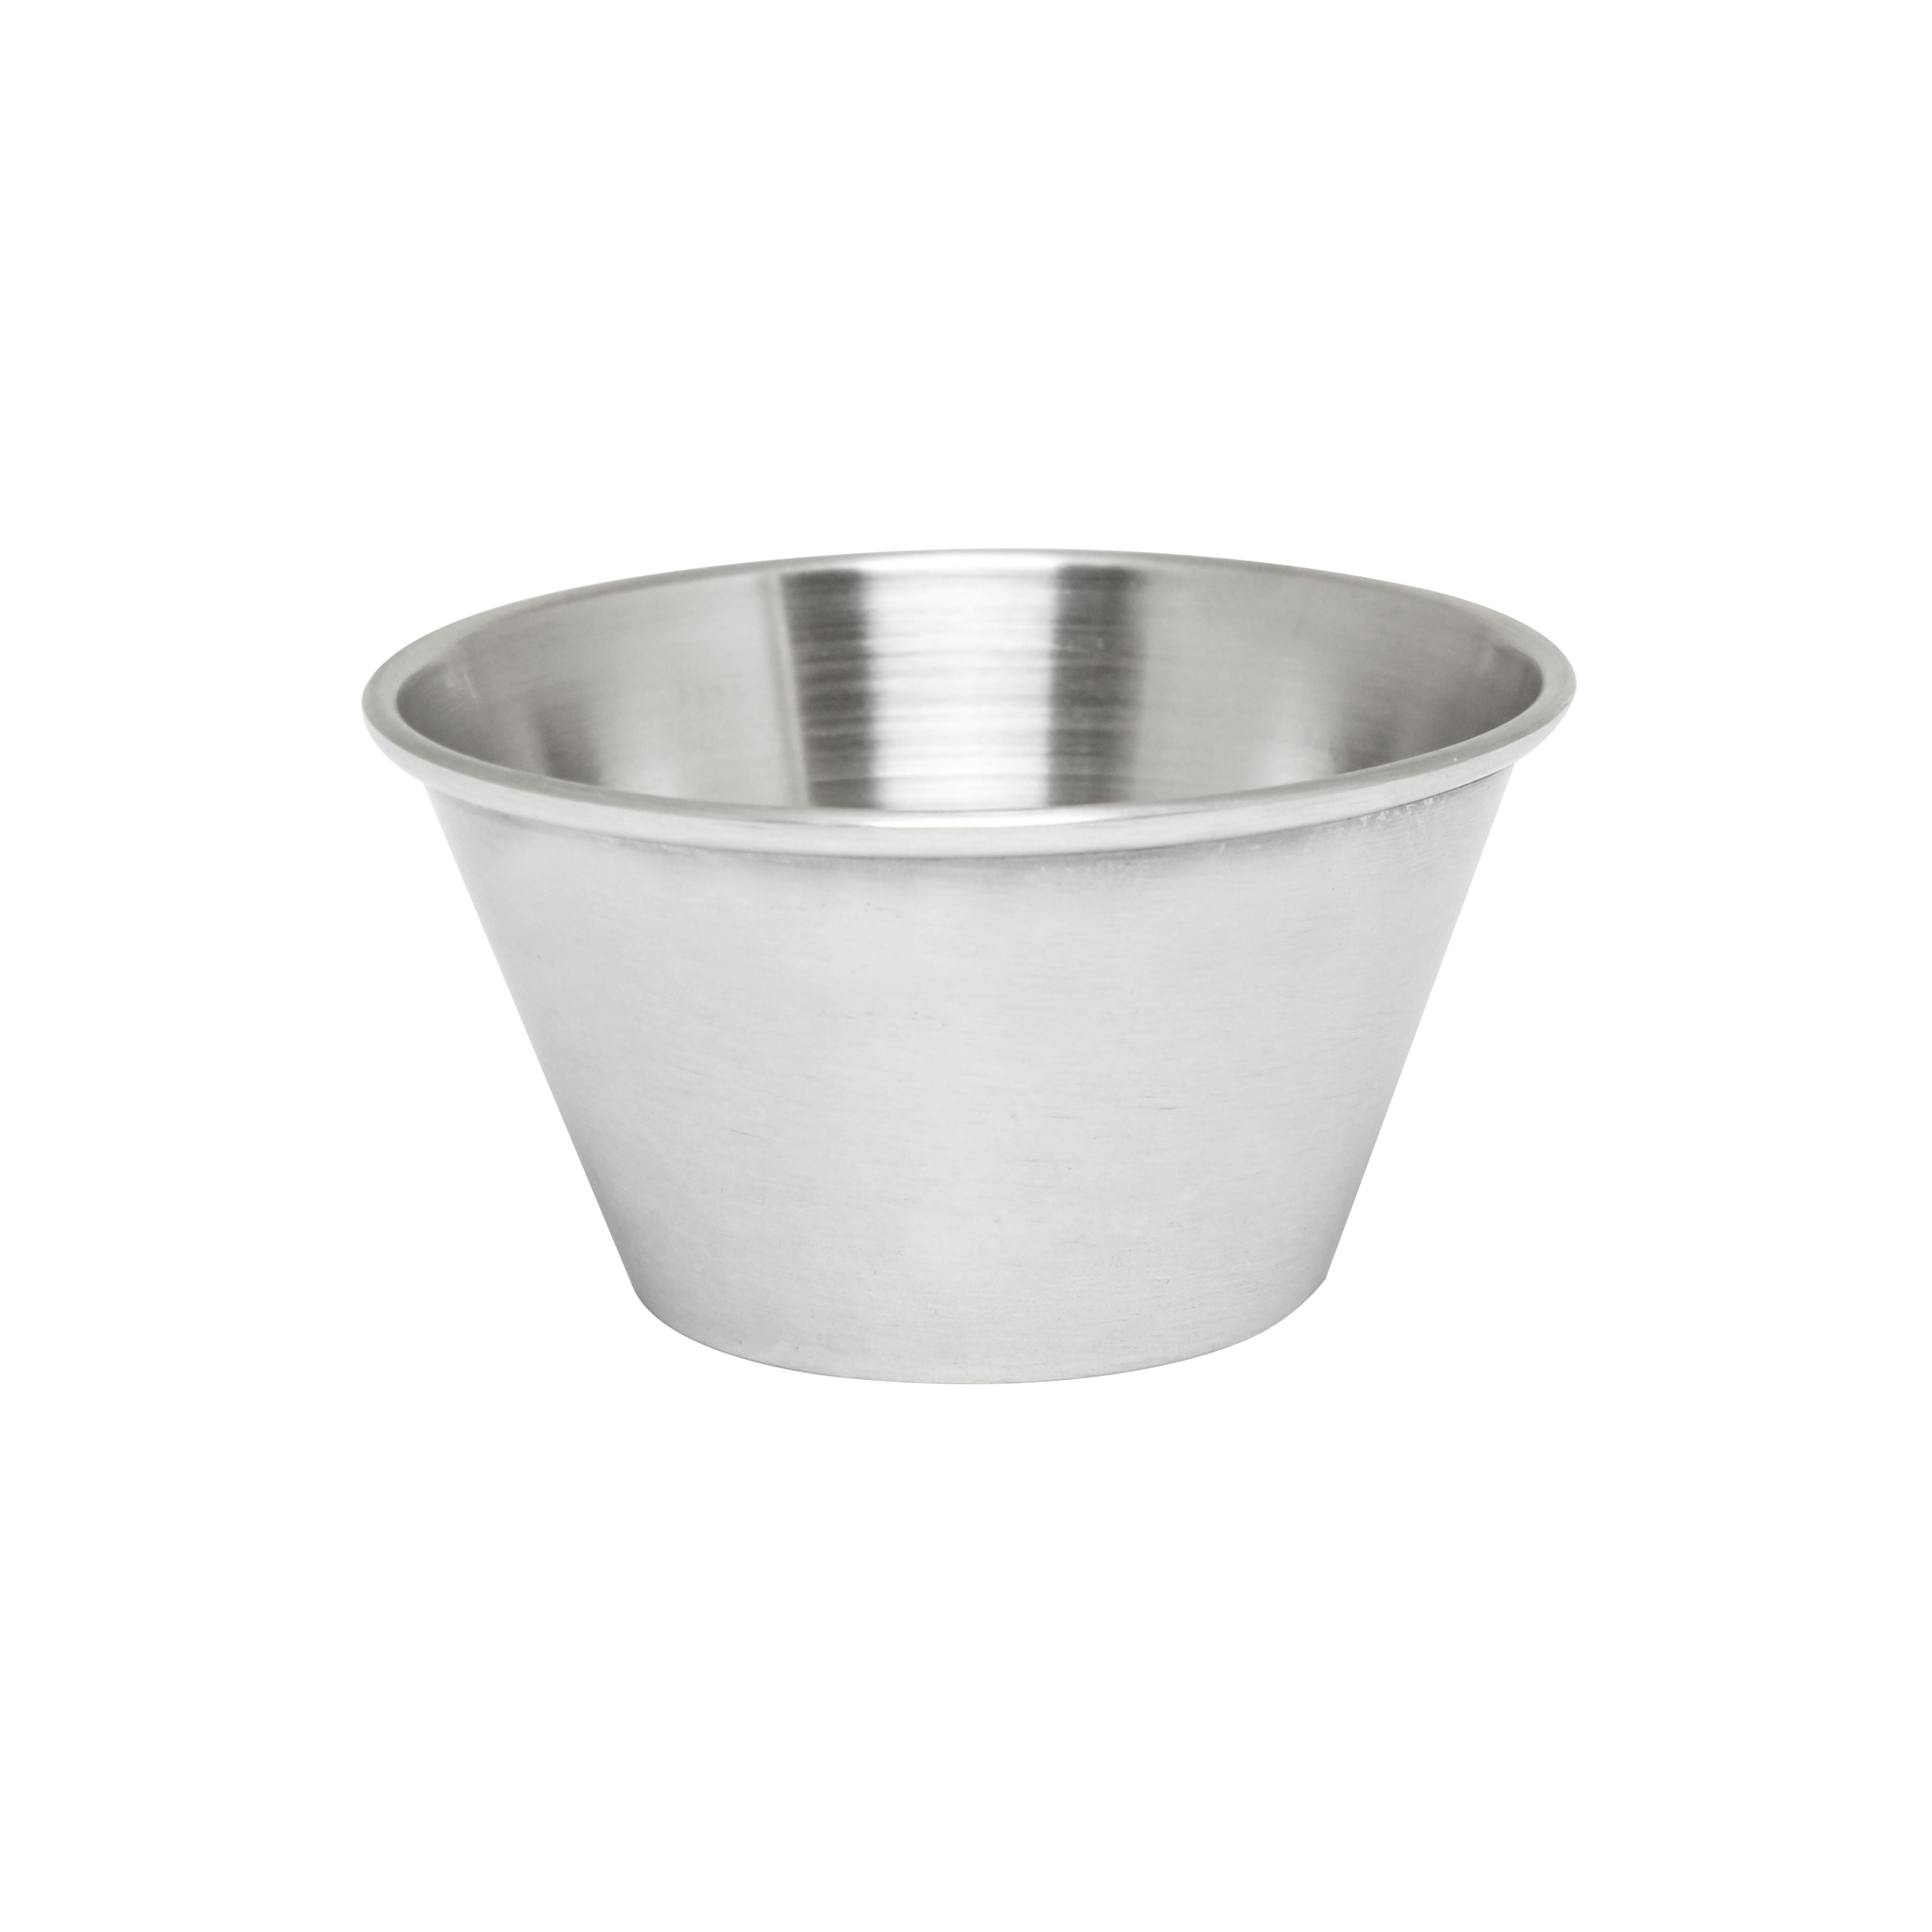 Thunder Group SLSA003 Stainless Steel 3 oz. Sauce Cup - 12/Pack